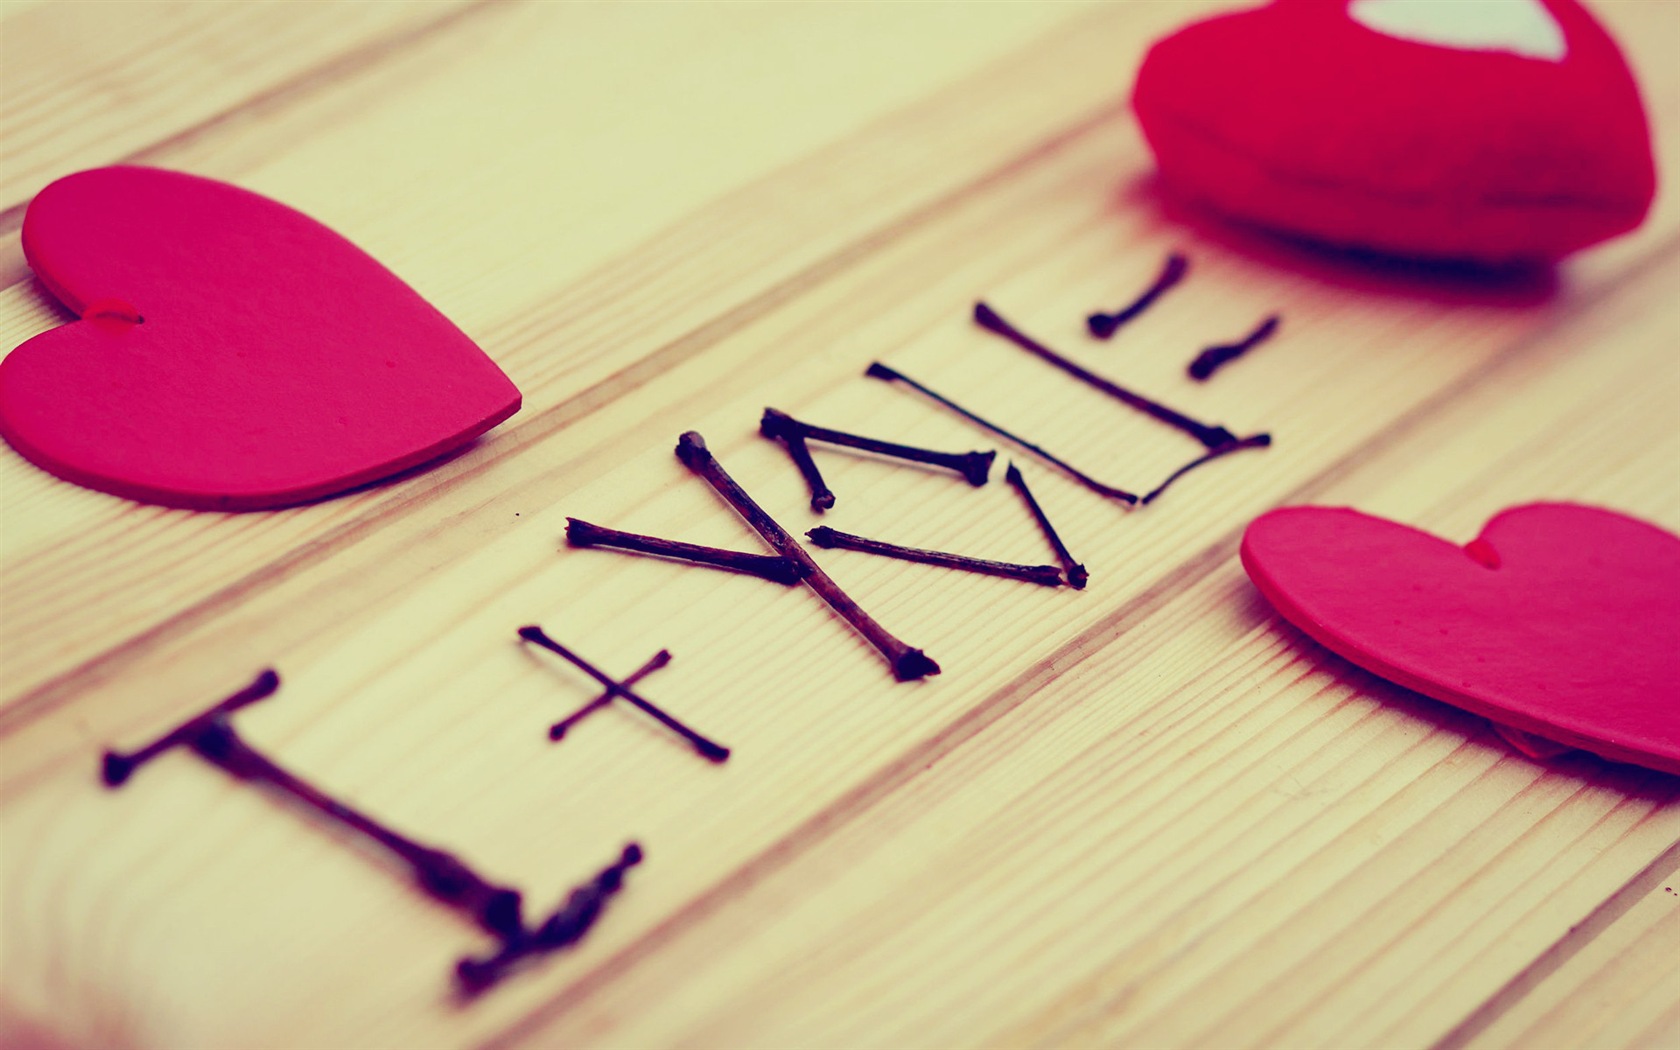 The theme of love, creative heart-shaped HD wallpapers #4 - 1680x1050